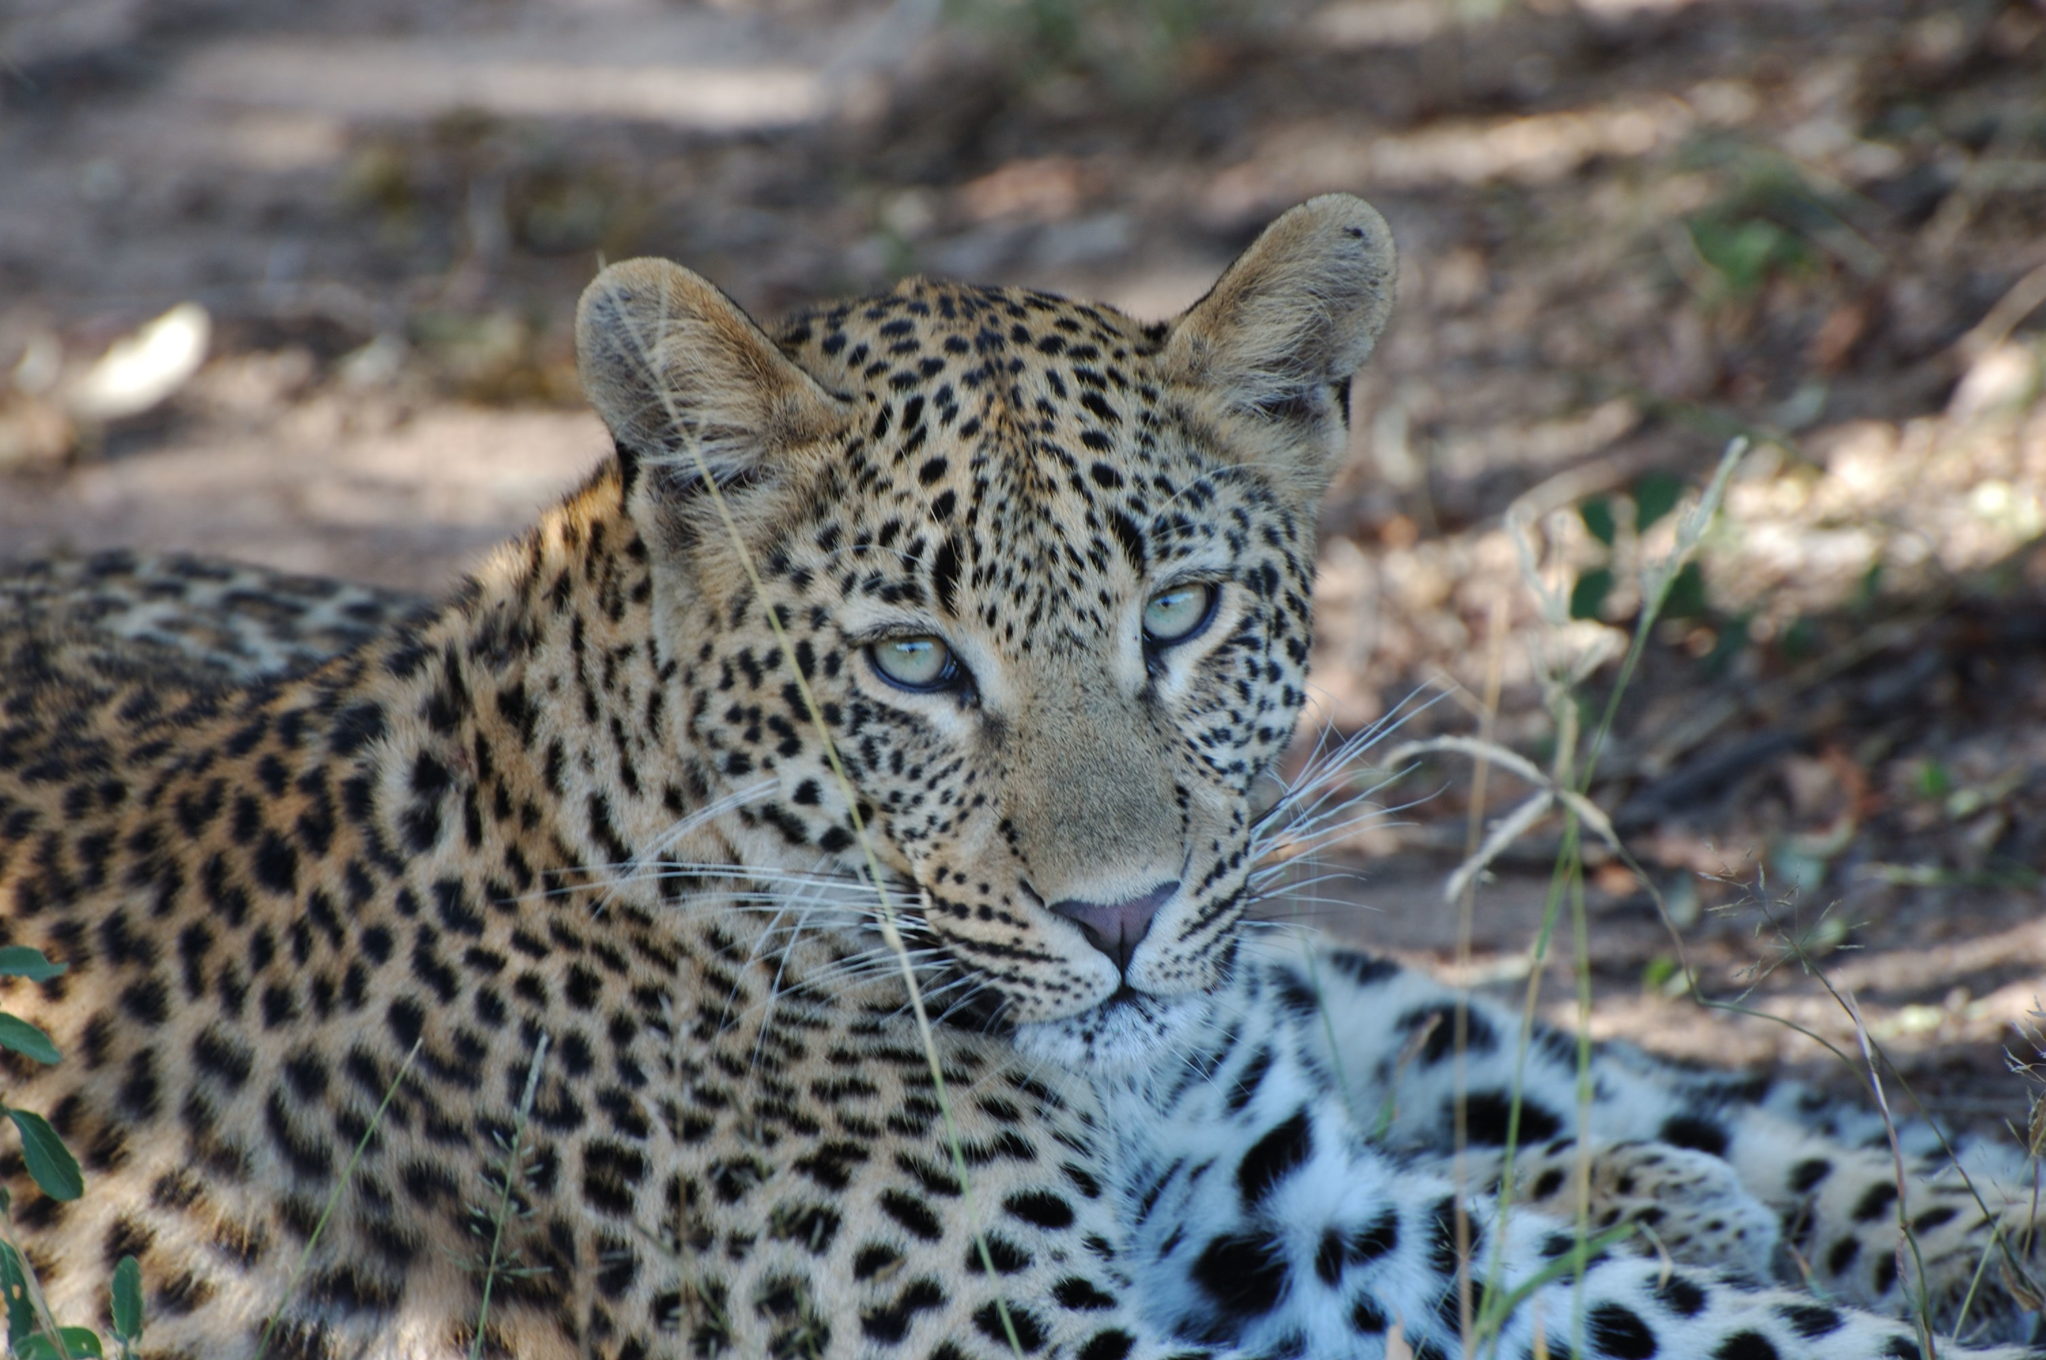 How to book a holiday to Africa-big five safari south africa